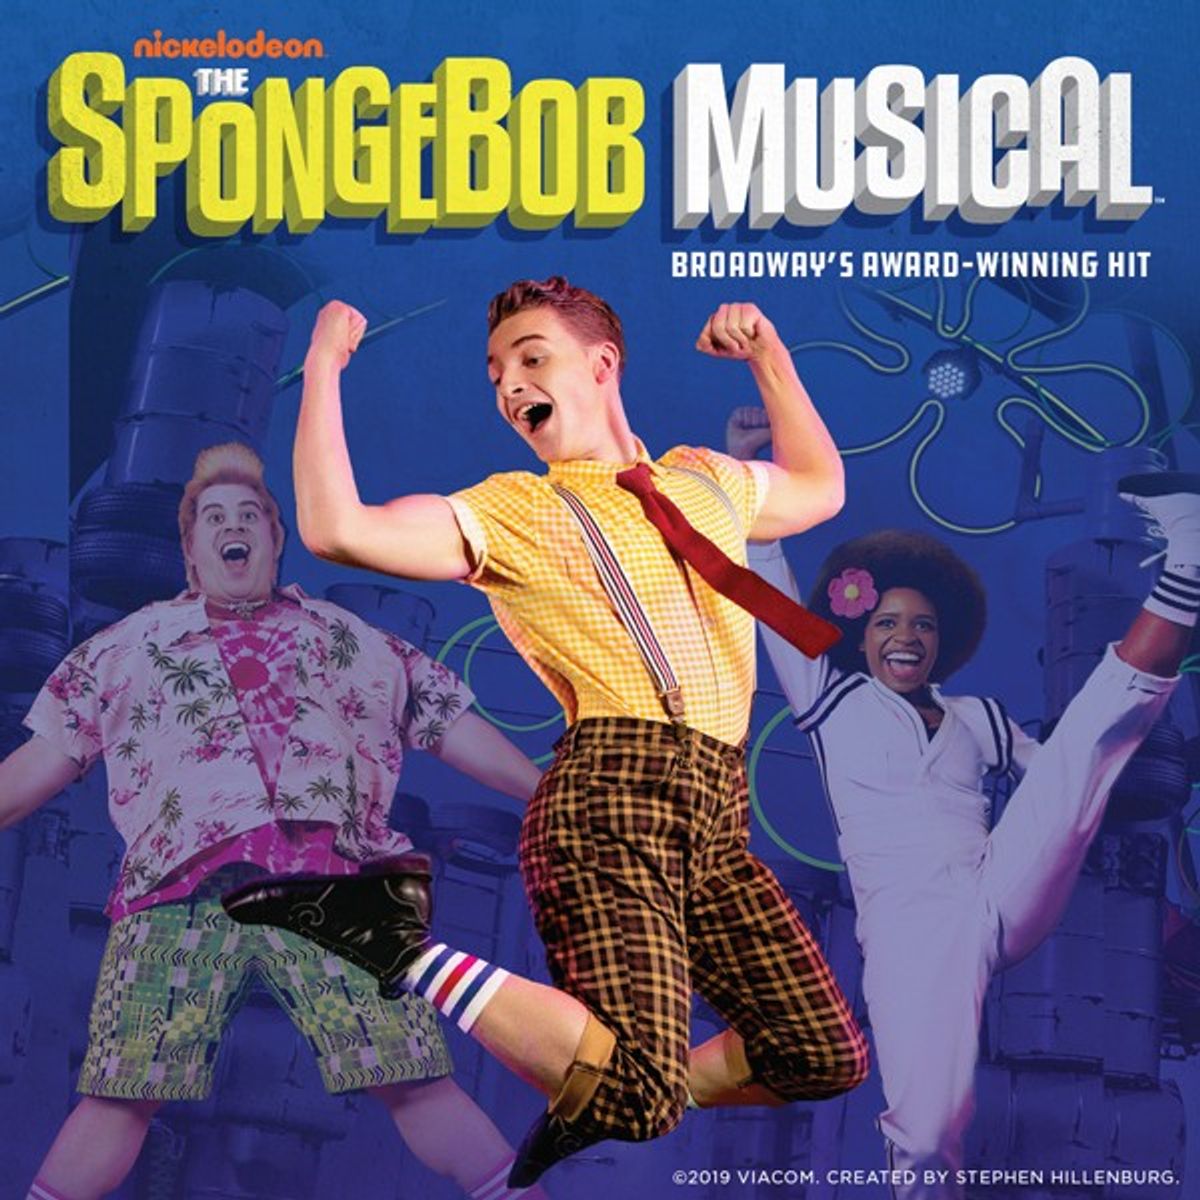 Nickelodeon S The Spongebob Musical At Pantages Theater In Tacoma Wa Thu Mar 5 Everout Seattle